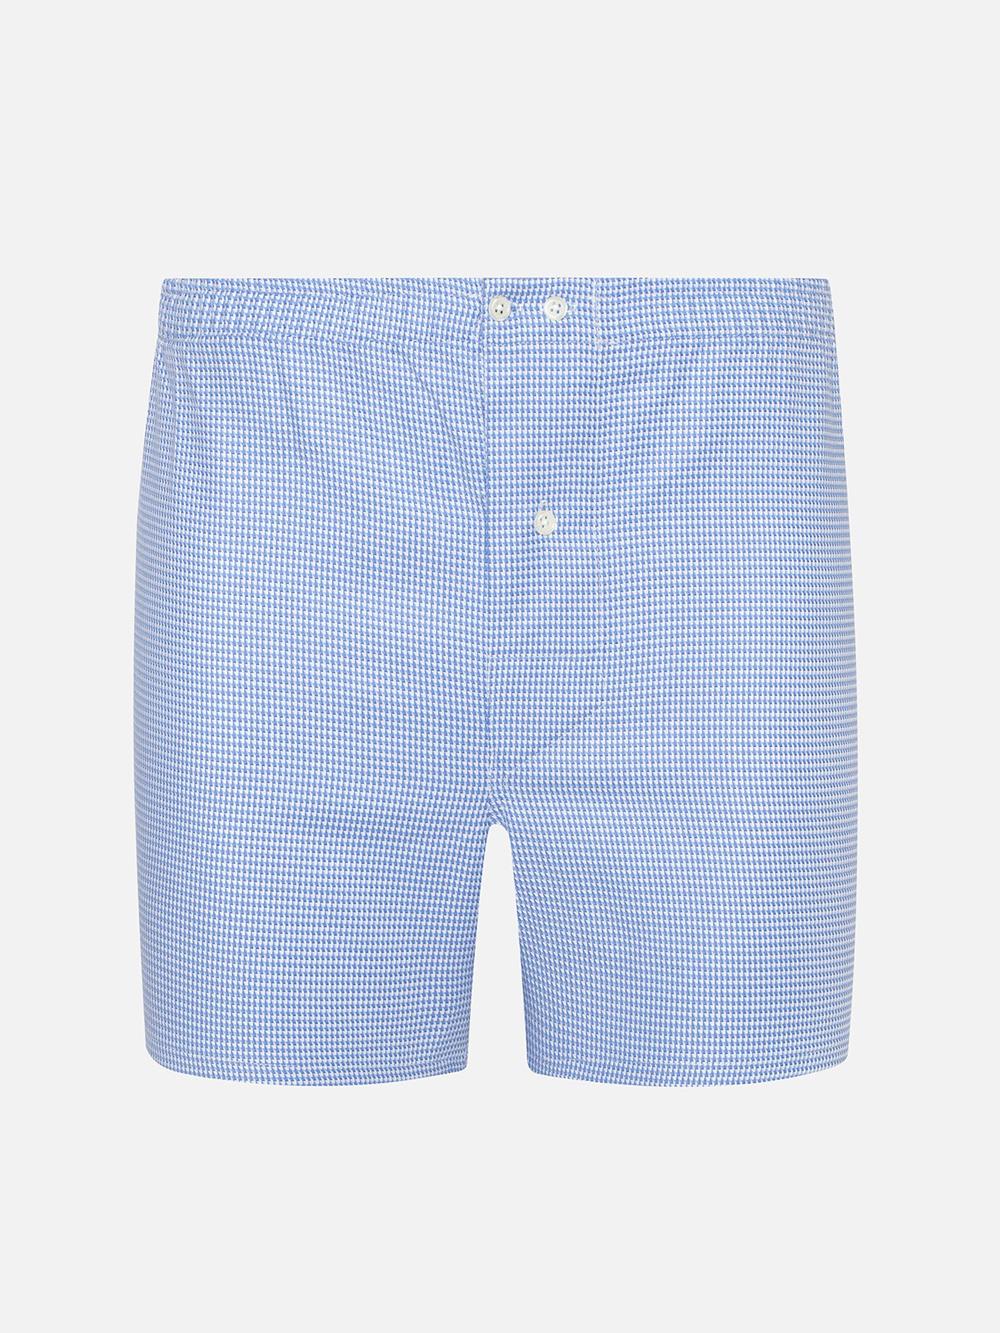 Blue sky and white printed houndstooth twill boxer short